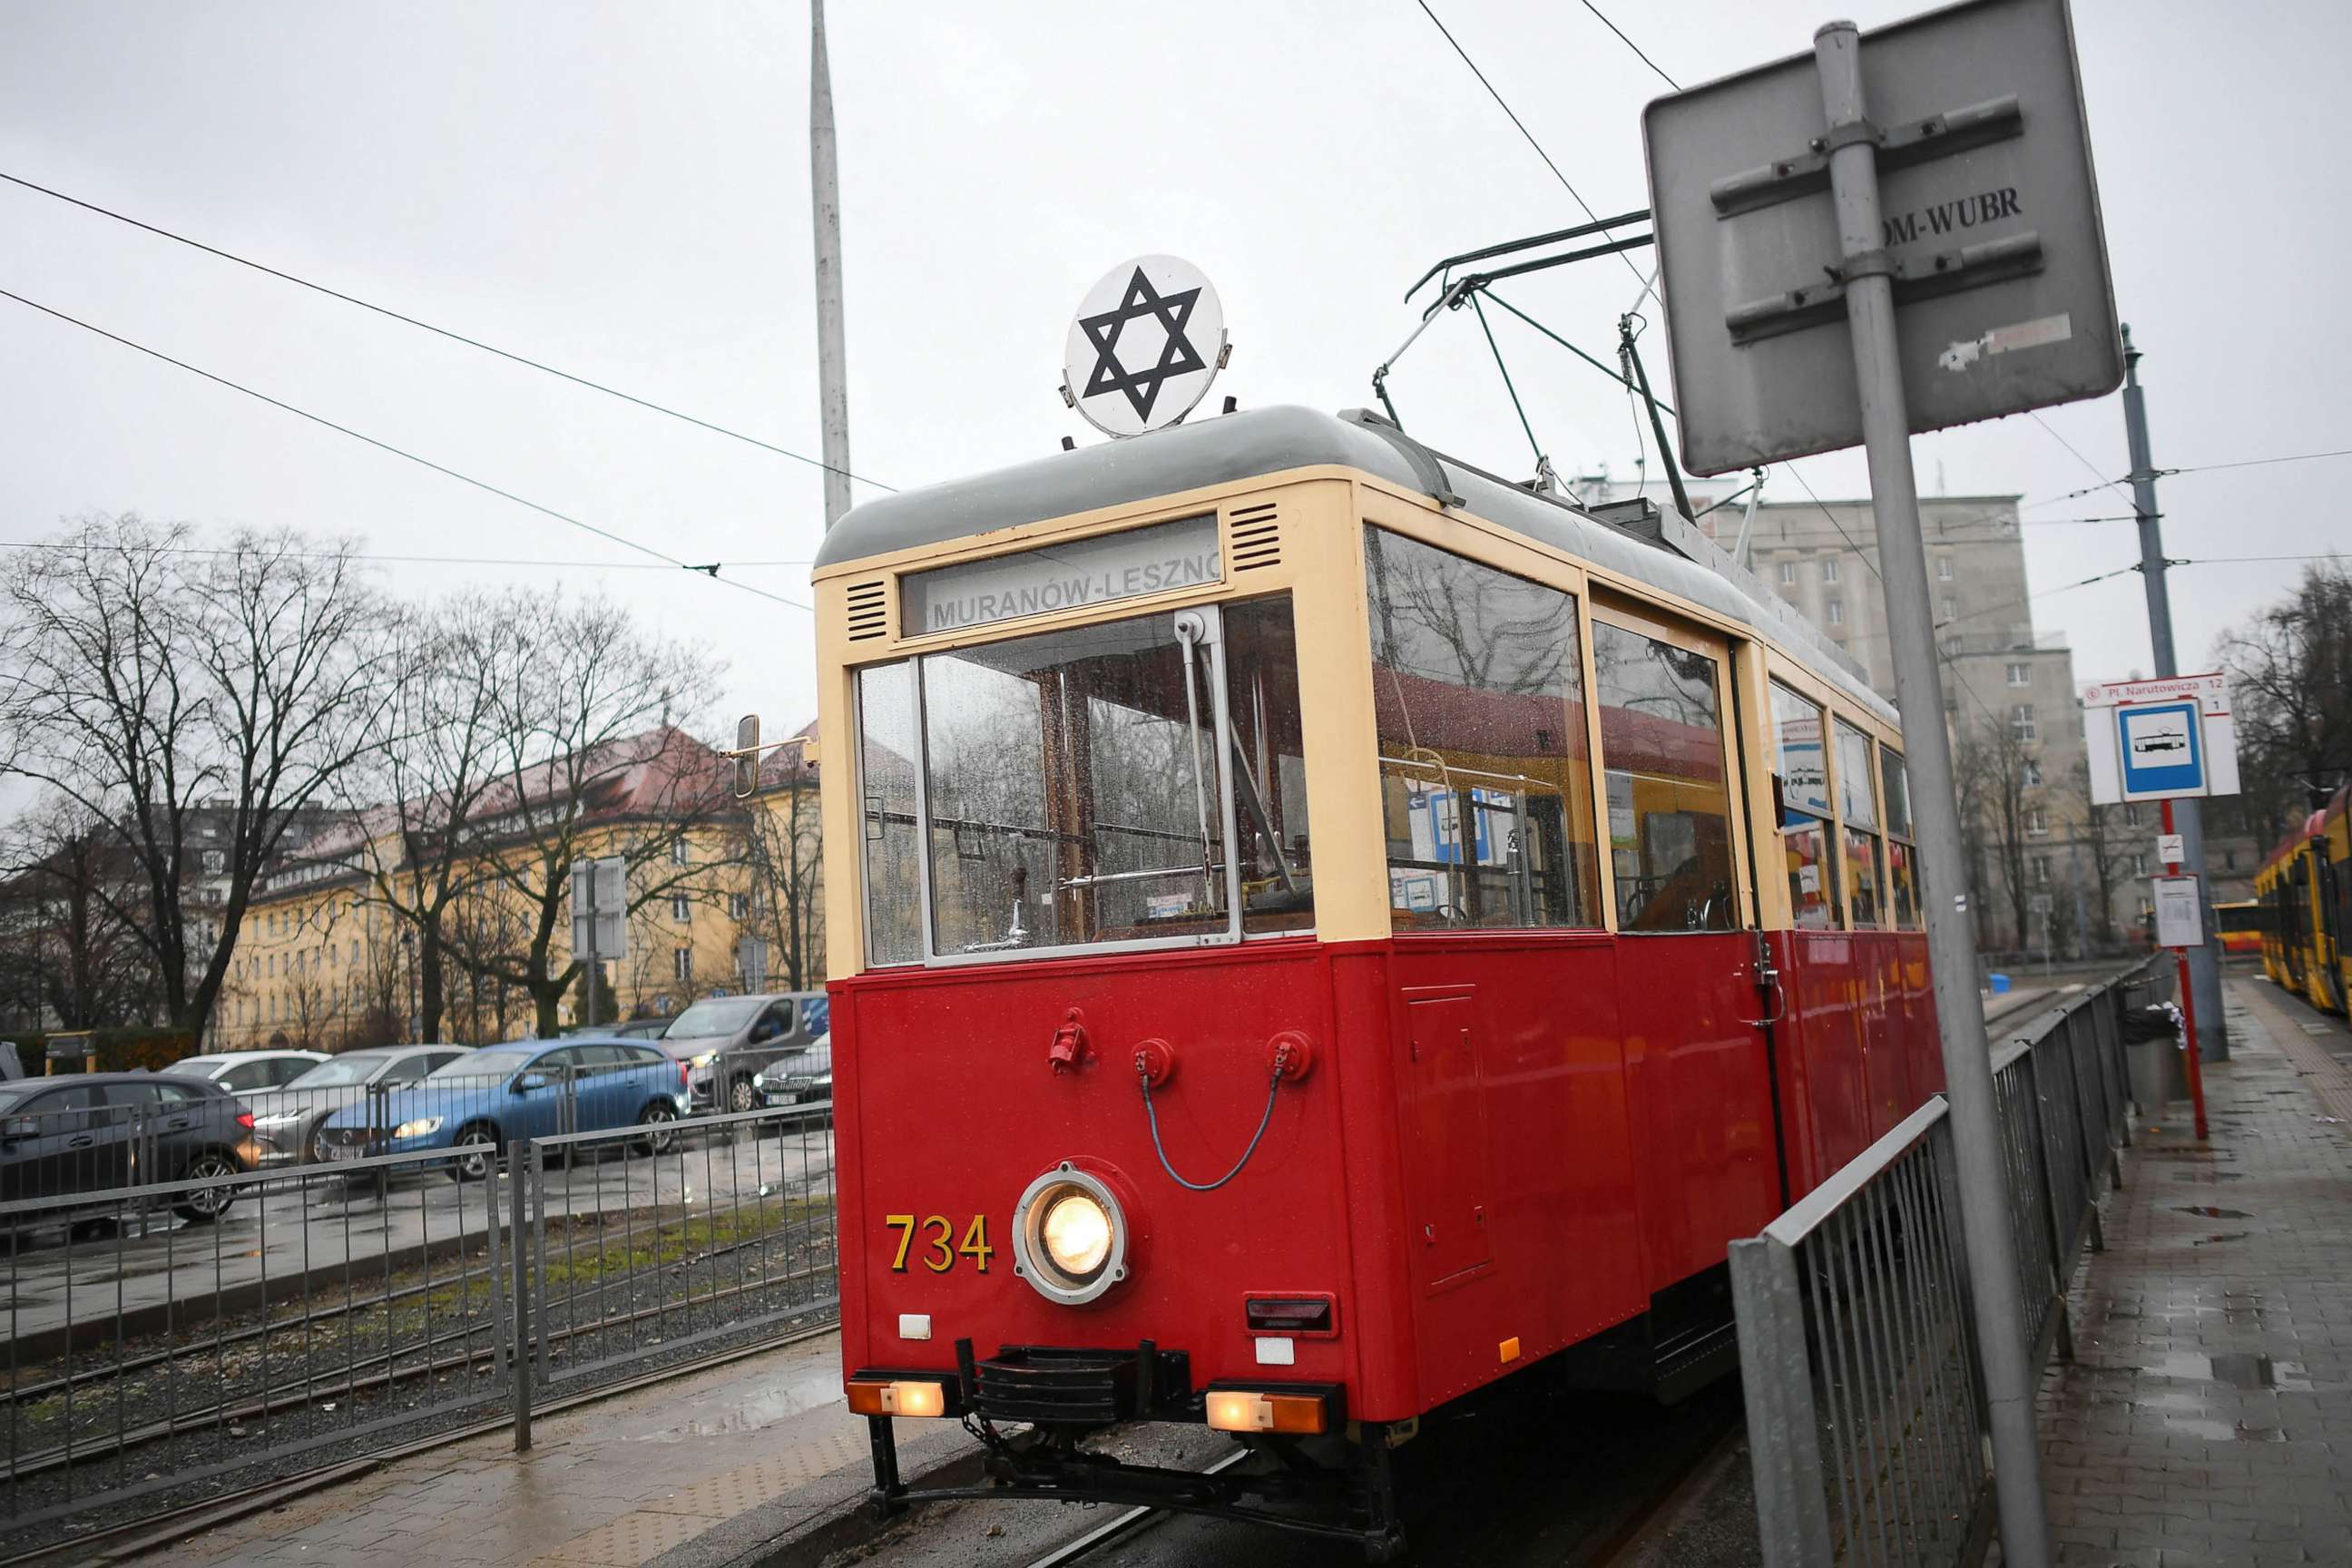 PHOTO: A historic tram marked with the Star of David symbolizing the tram running in the Warsaw Ghetto, traverses the streets in commemoration of International Holocaust Remembrance Day in of Warsaw, Jan. 27, 2022.